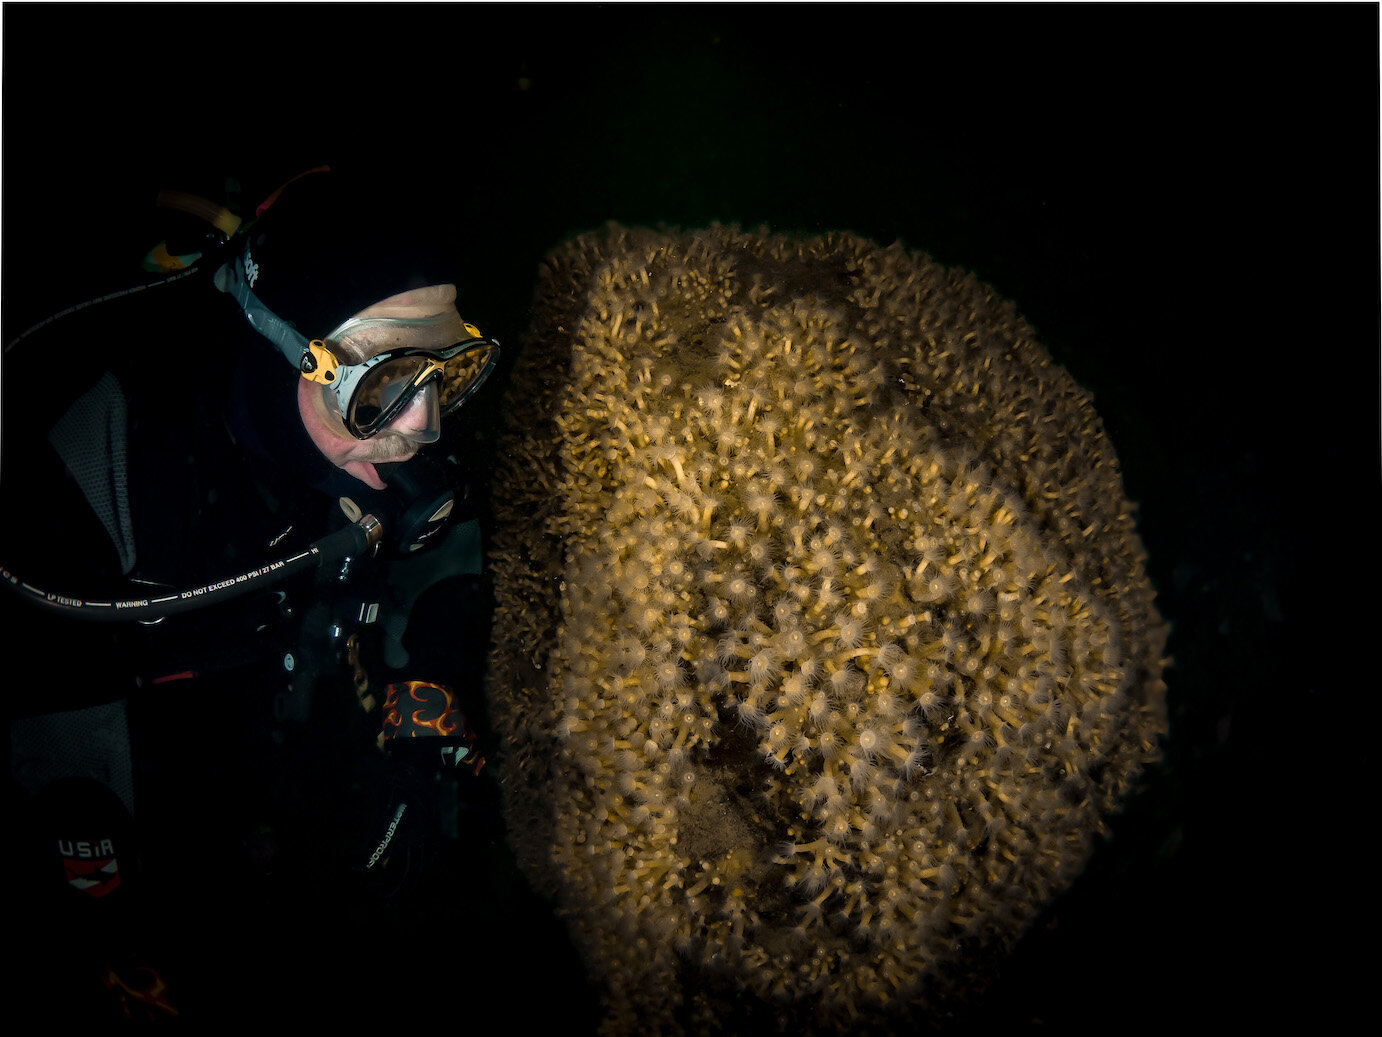 Diver with Yellow Zoo Anthid by Laura Tesler